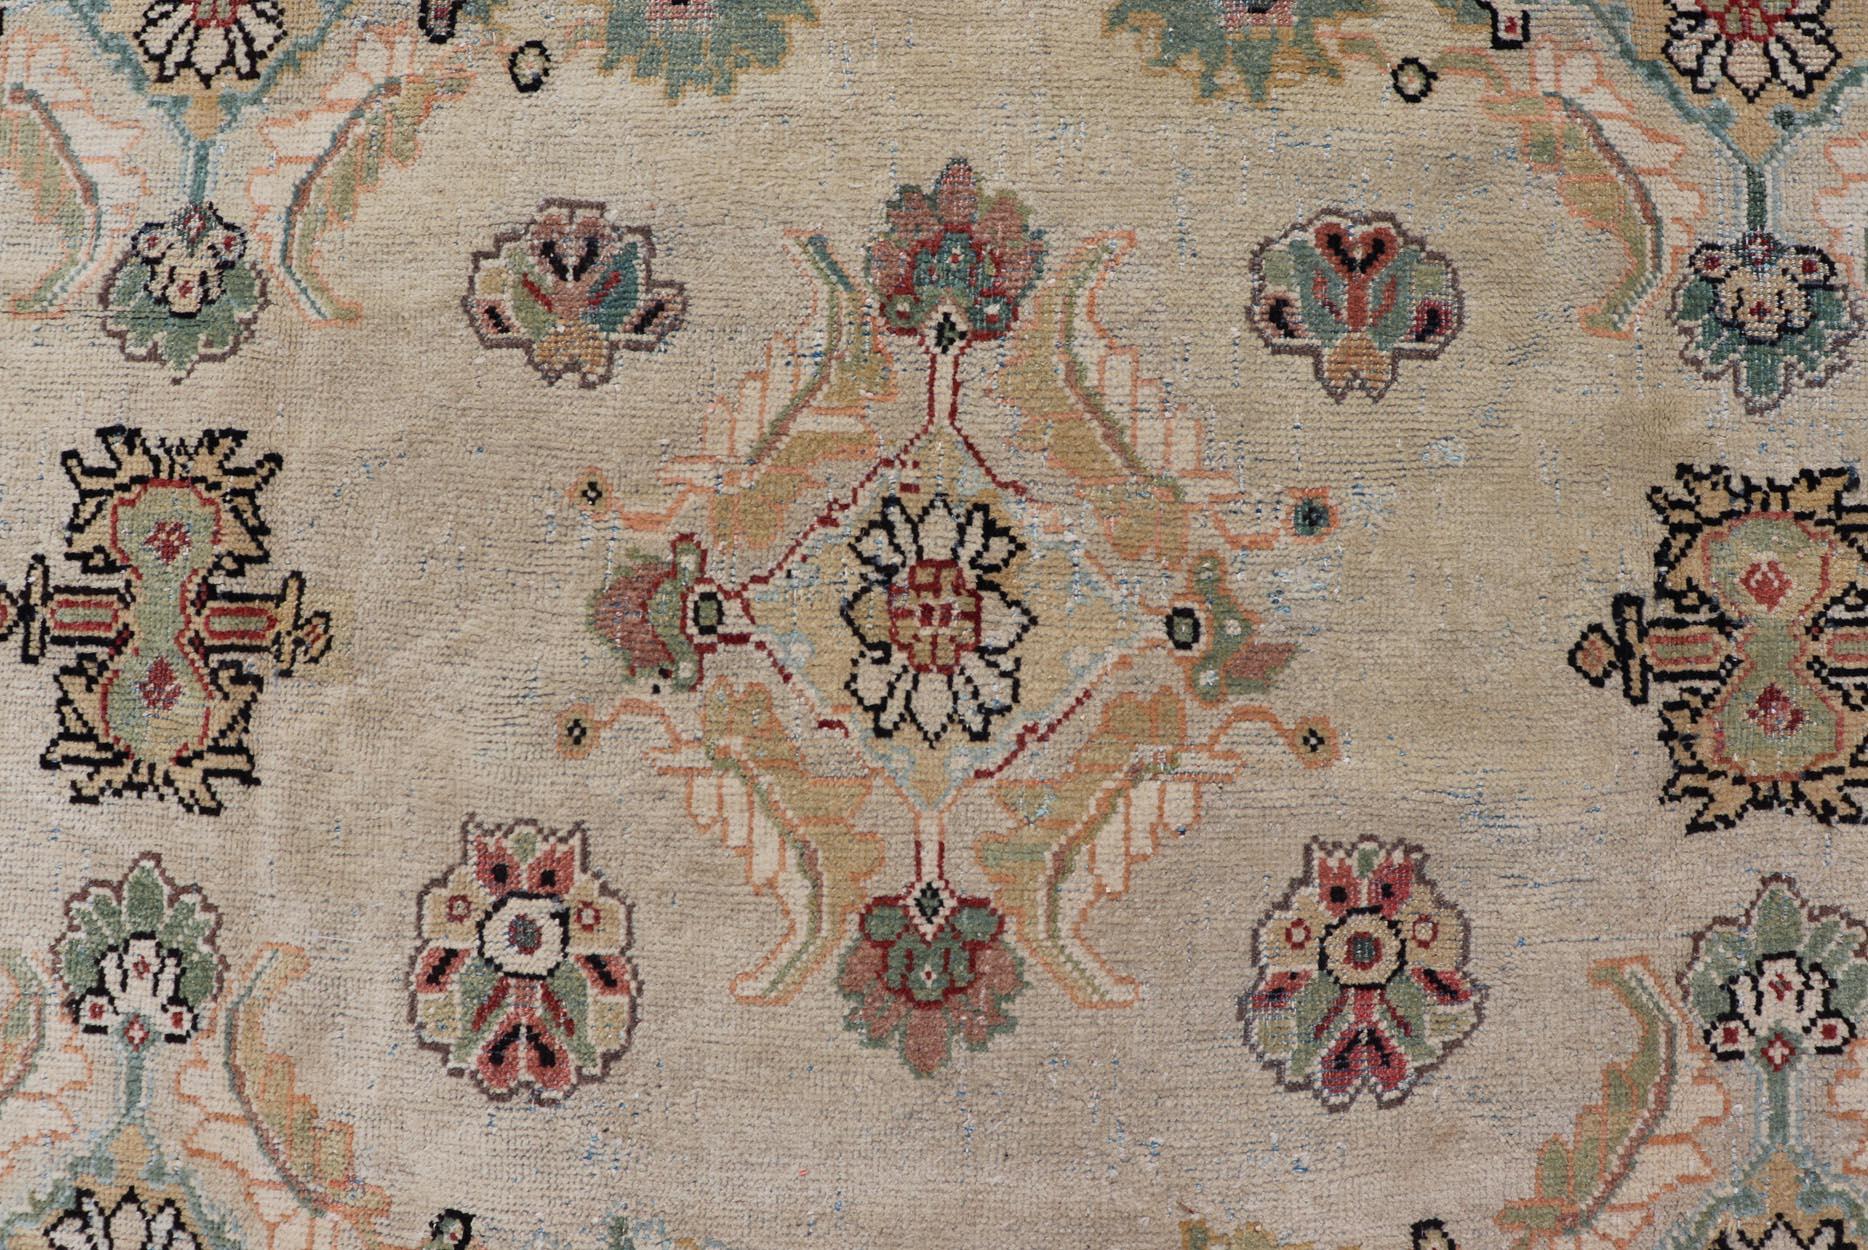 Antique Persian Sultanabad-Mahal Rug. Keivan Woven Arts / rug/ X23-0202, country of origin / type: Persian / Sultanabad, circa Early-20th Century.

Measures: 9'0 x 12'0

Antique Persian Sultanabad-Mahal Rug in Ivory background and border. This